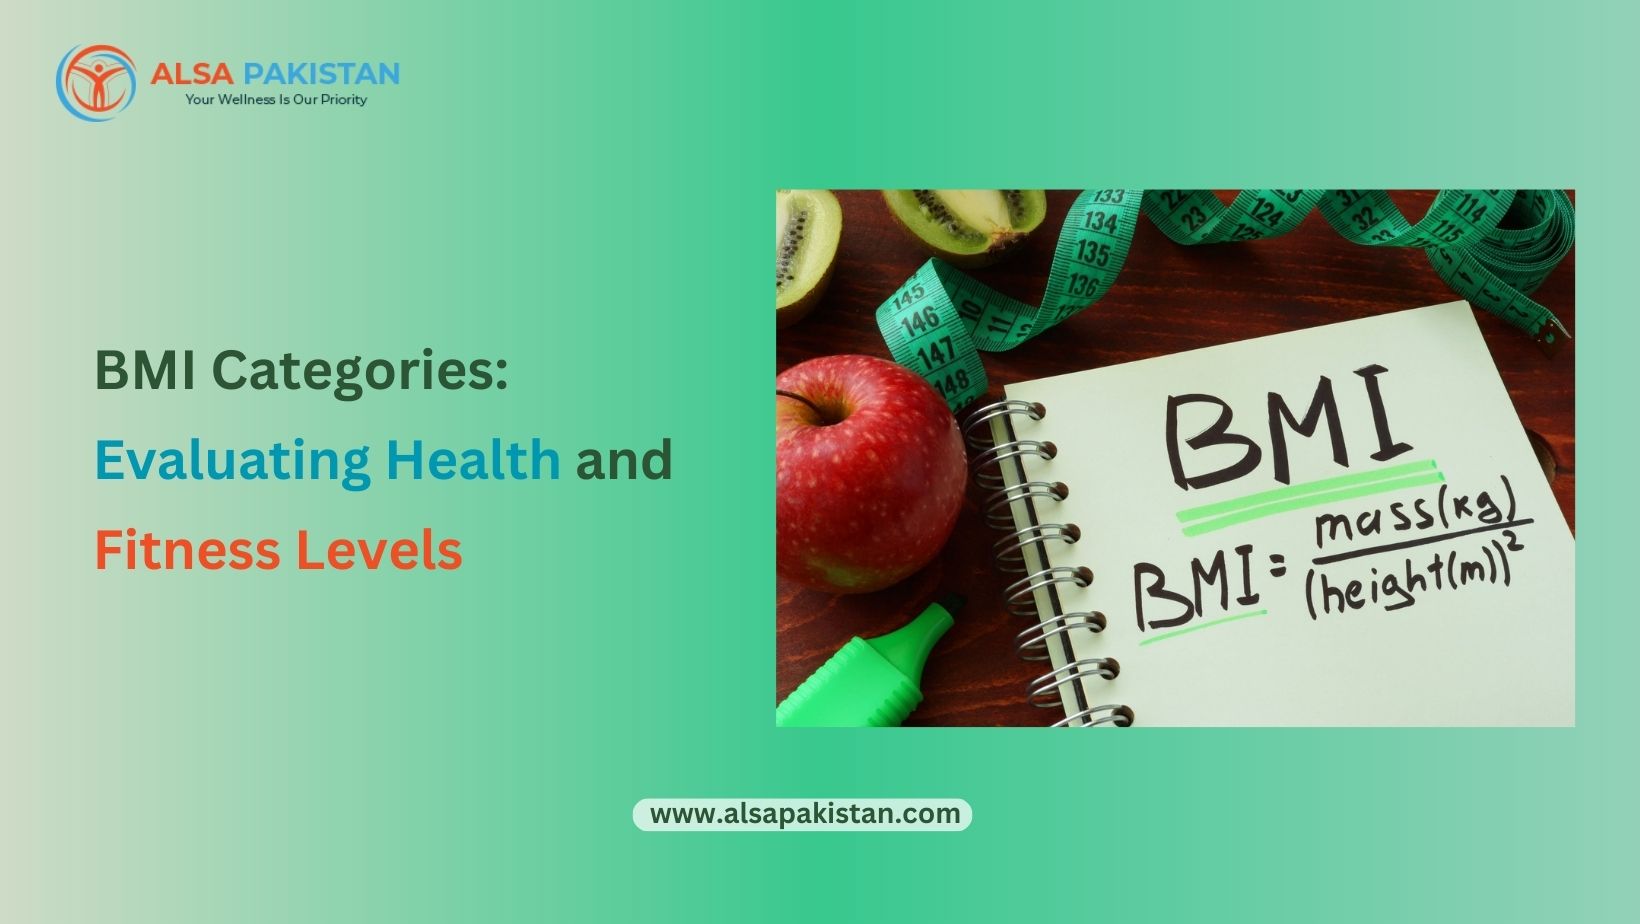 BMI Categories: Evaluating Health and Fitness Levels